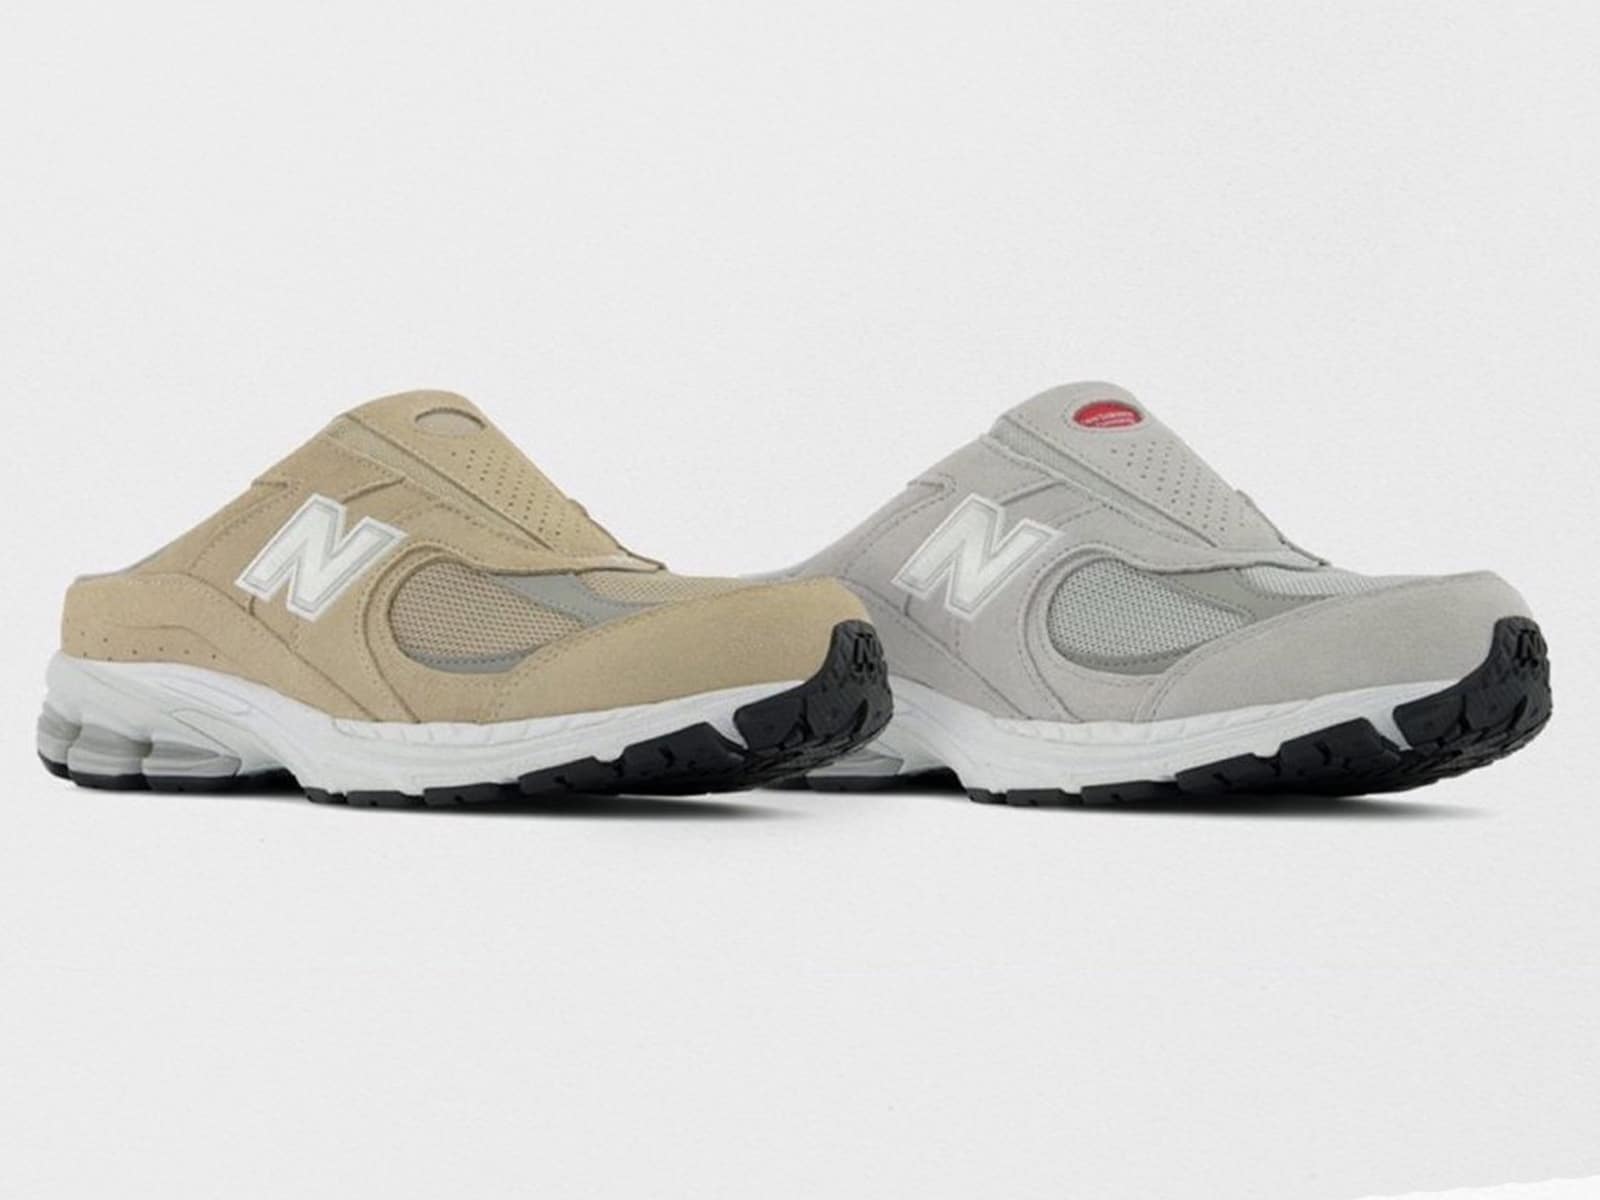 All the details about the New Balance 2002R Mule